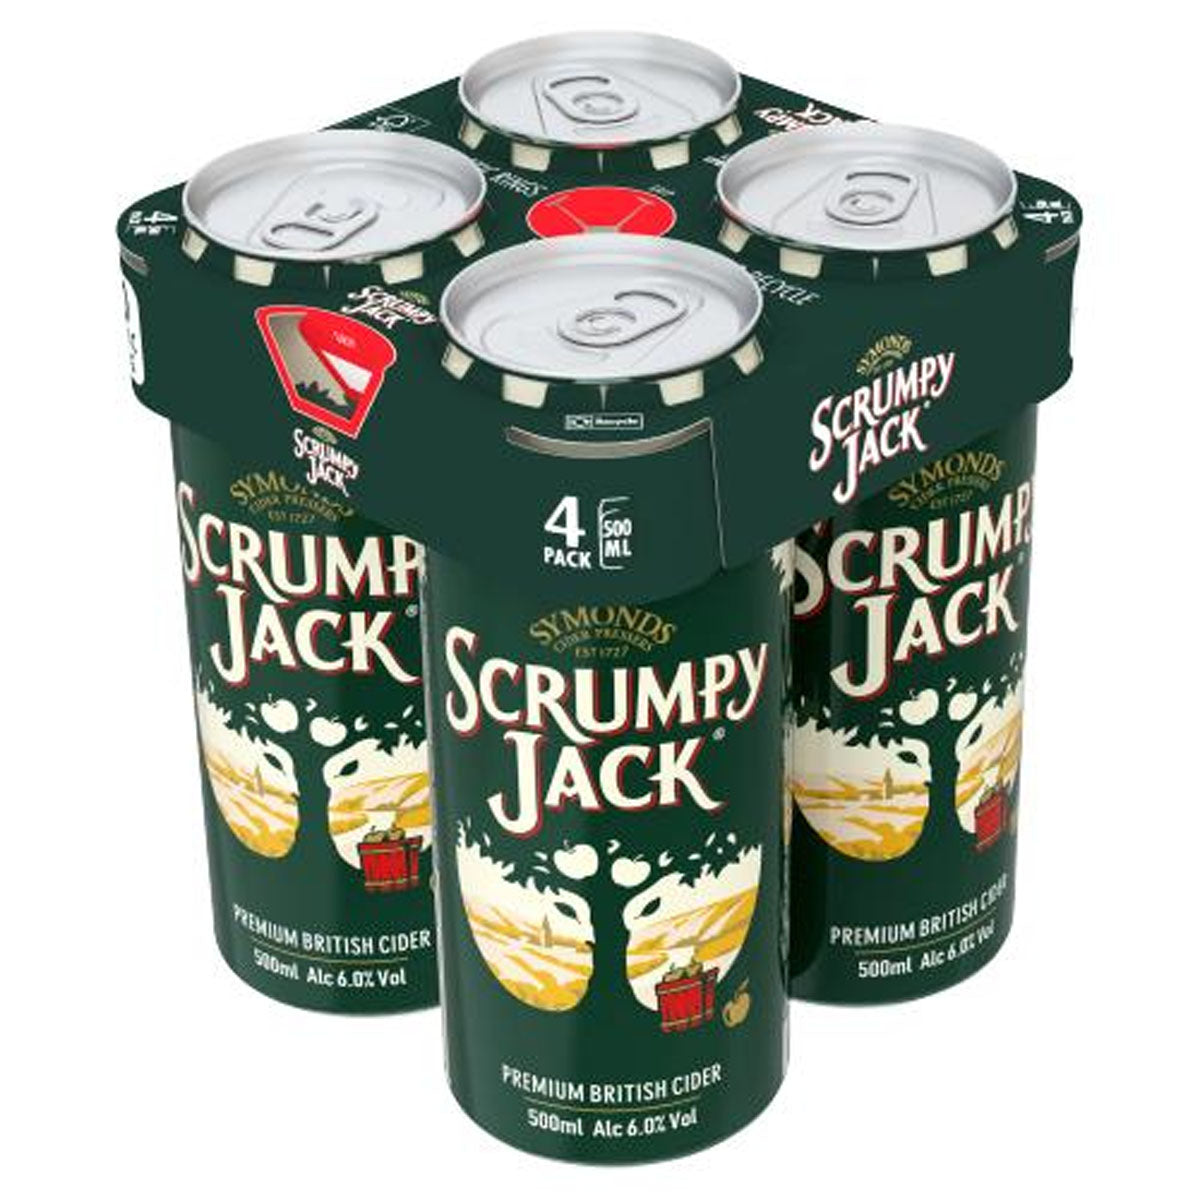 Four cans of Scrumpy Jack - Premium British Cider Can (6% ABV) - 4 x 500ml on a white background.